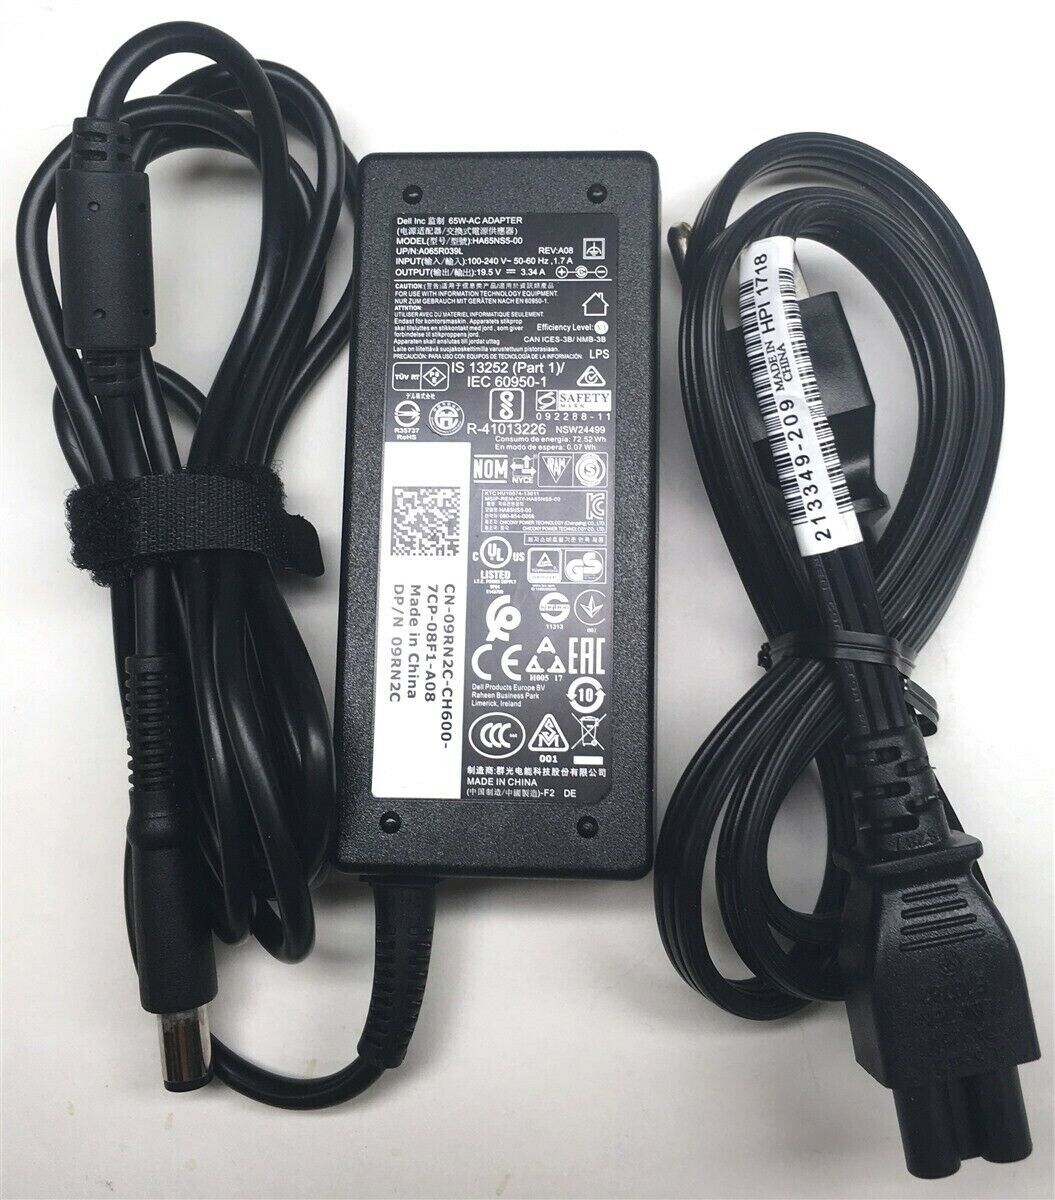 Genuine Dell Laptop Charger AC Adapter Power Supply HA65NS5-00 09RN2C 19.5V 65W